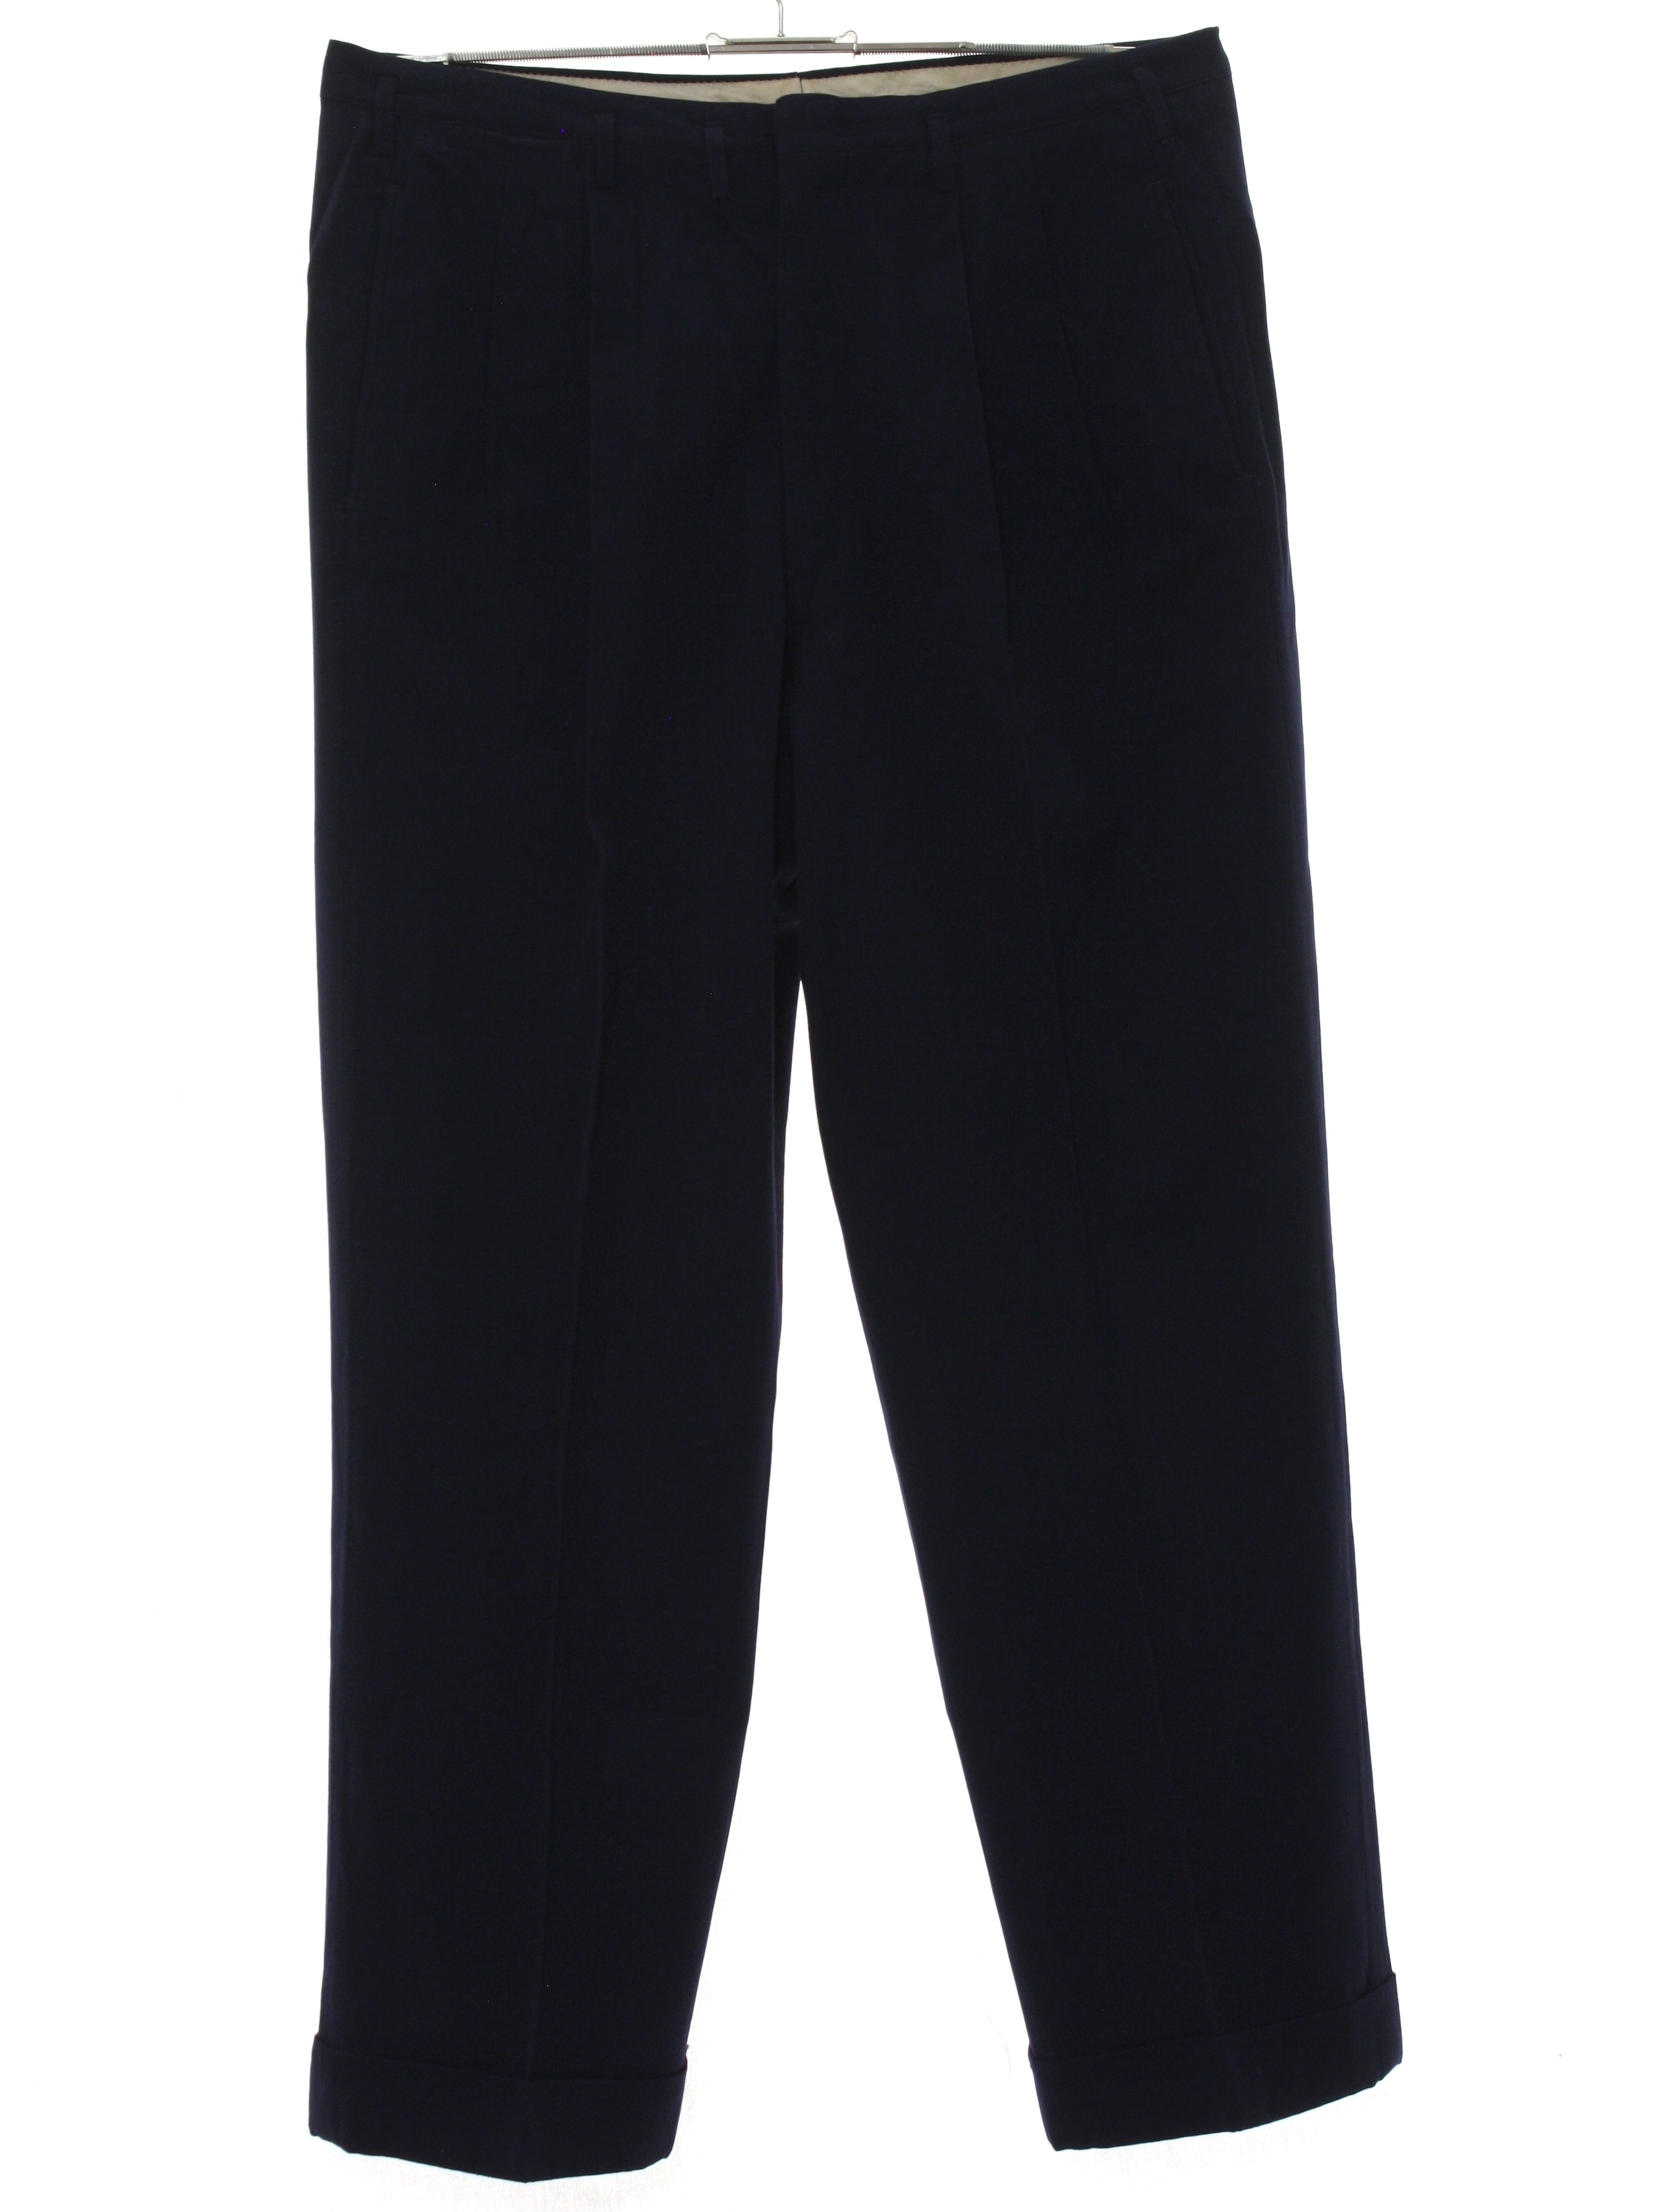 40s Pants: Late 40s -No Label- Mens navy blue wool gabardine pleated ...